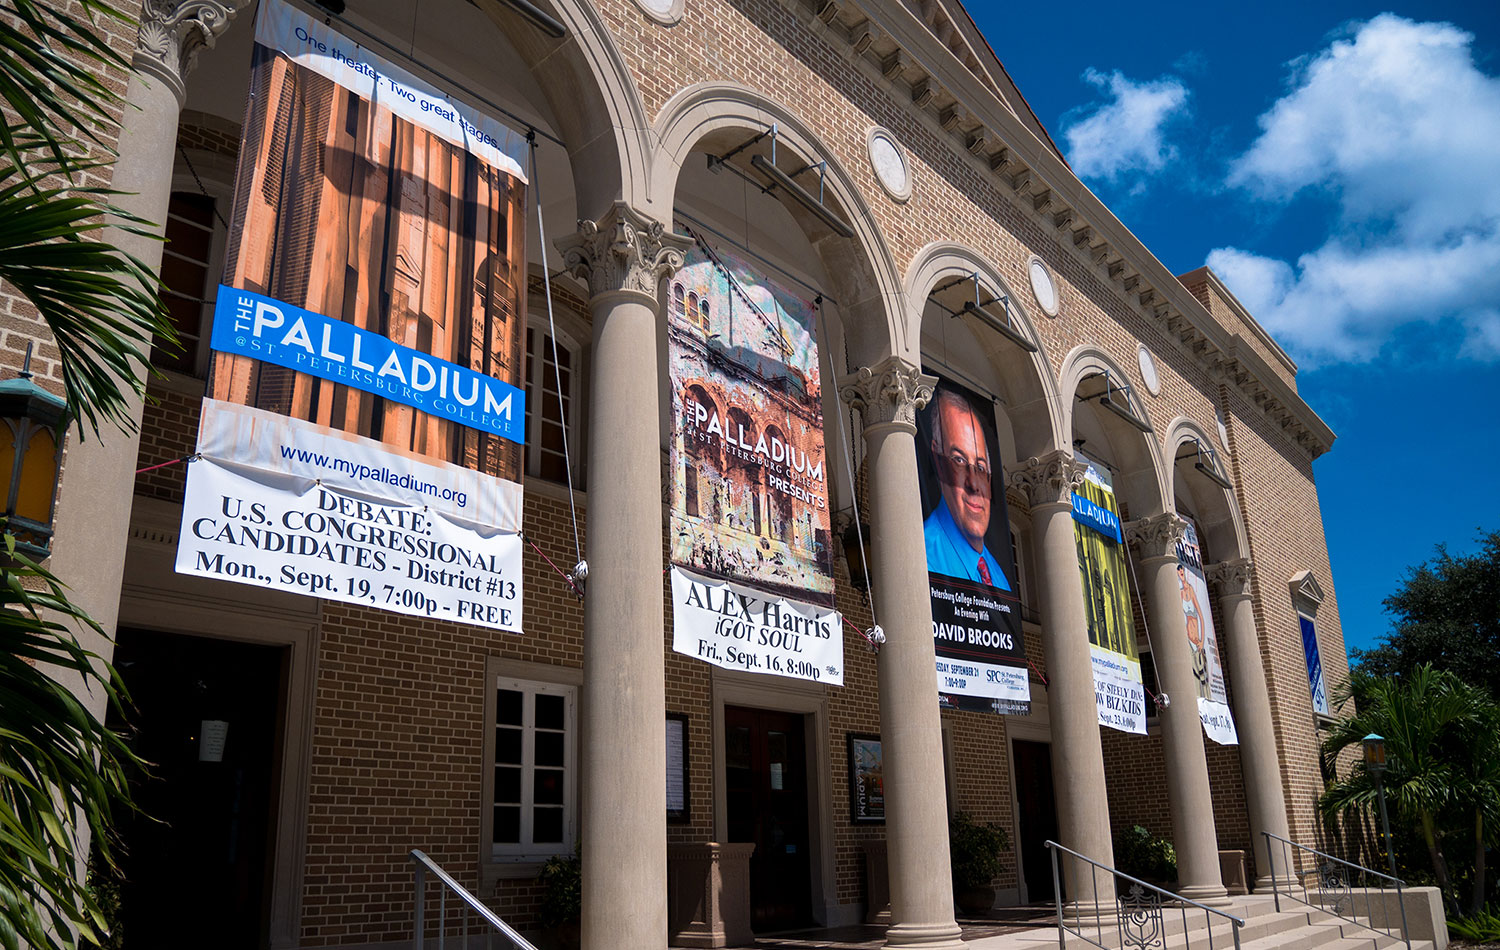 A view of the pillars and banners at the front of the Palladium